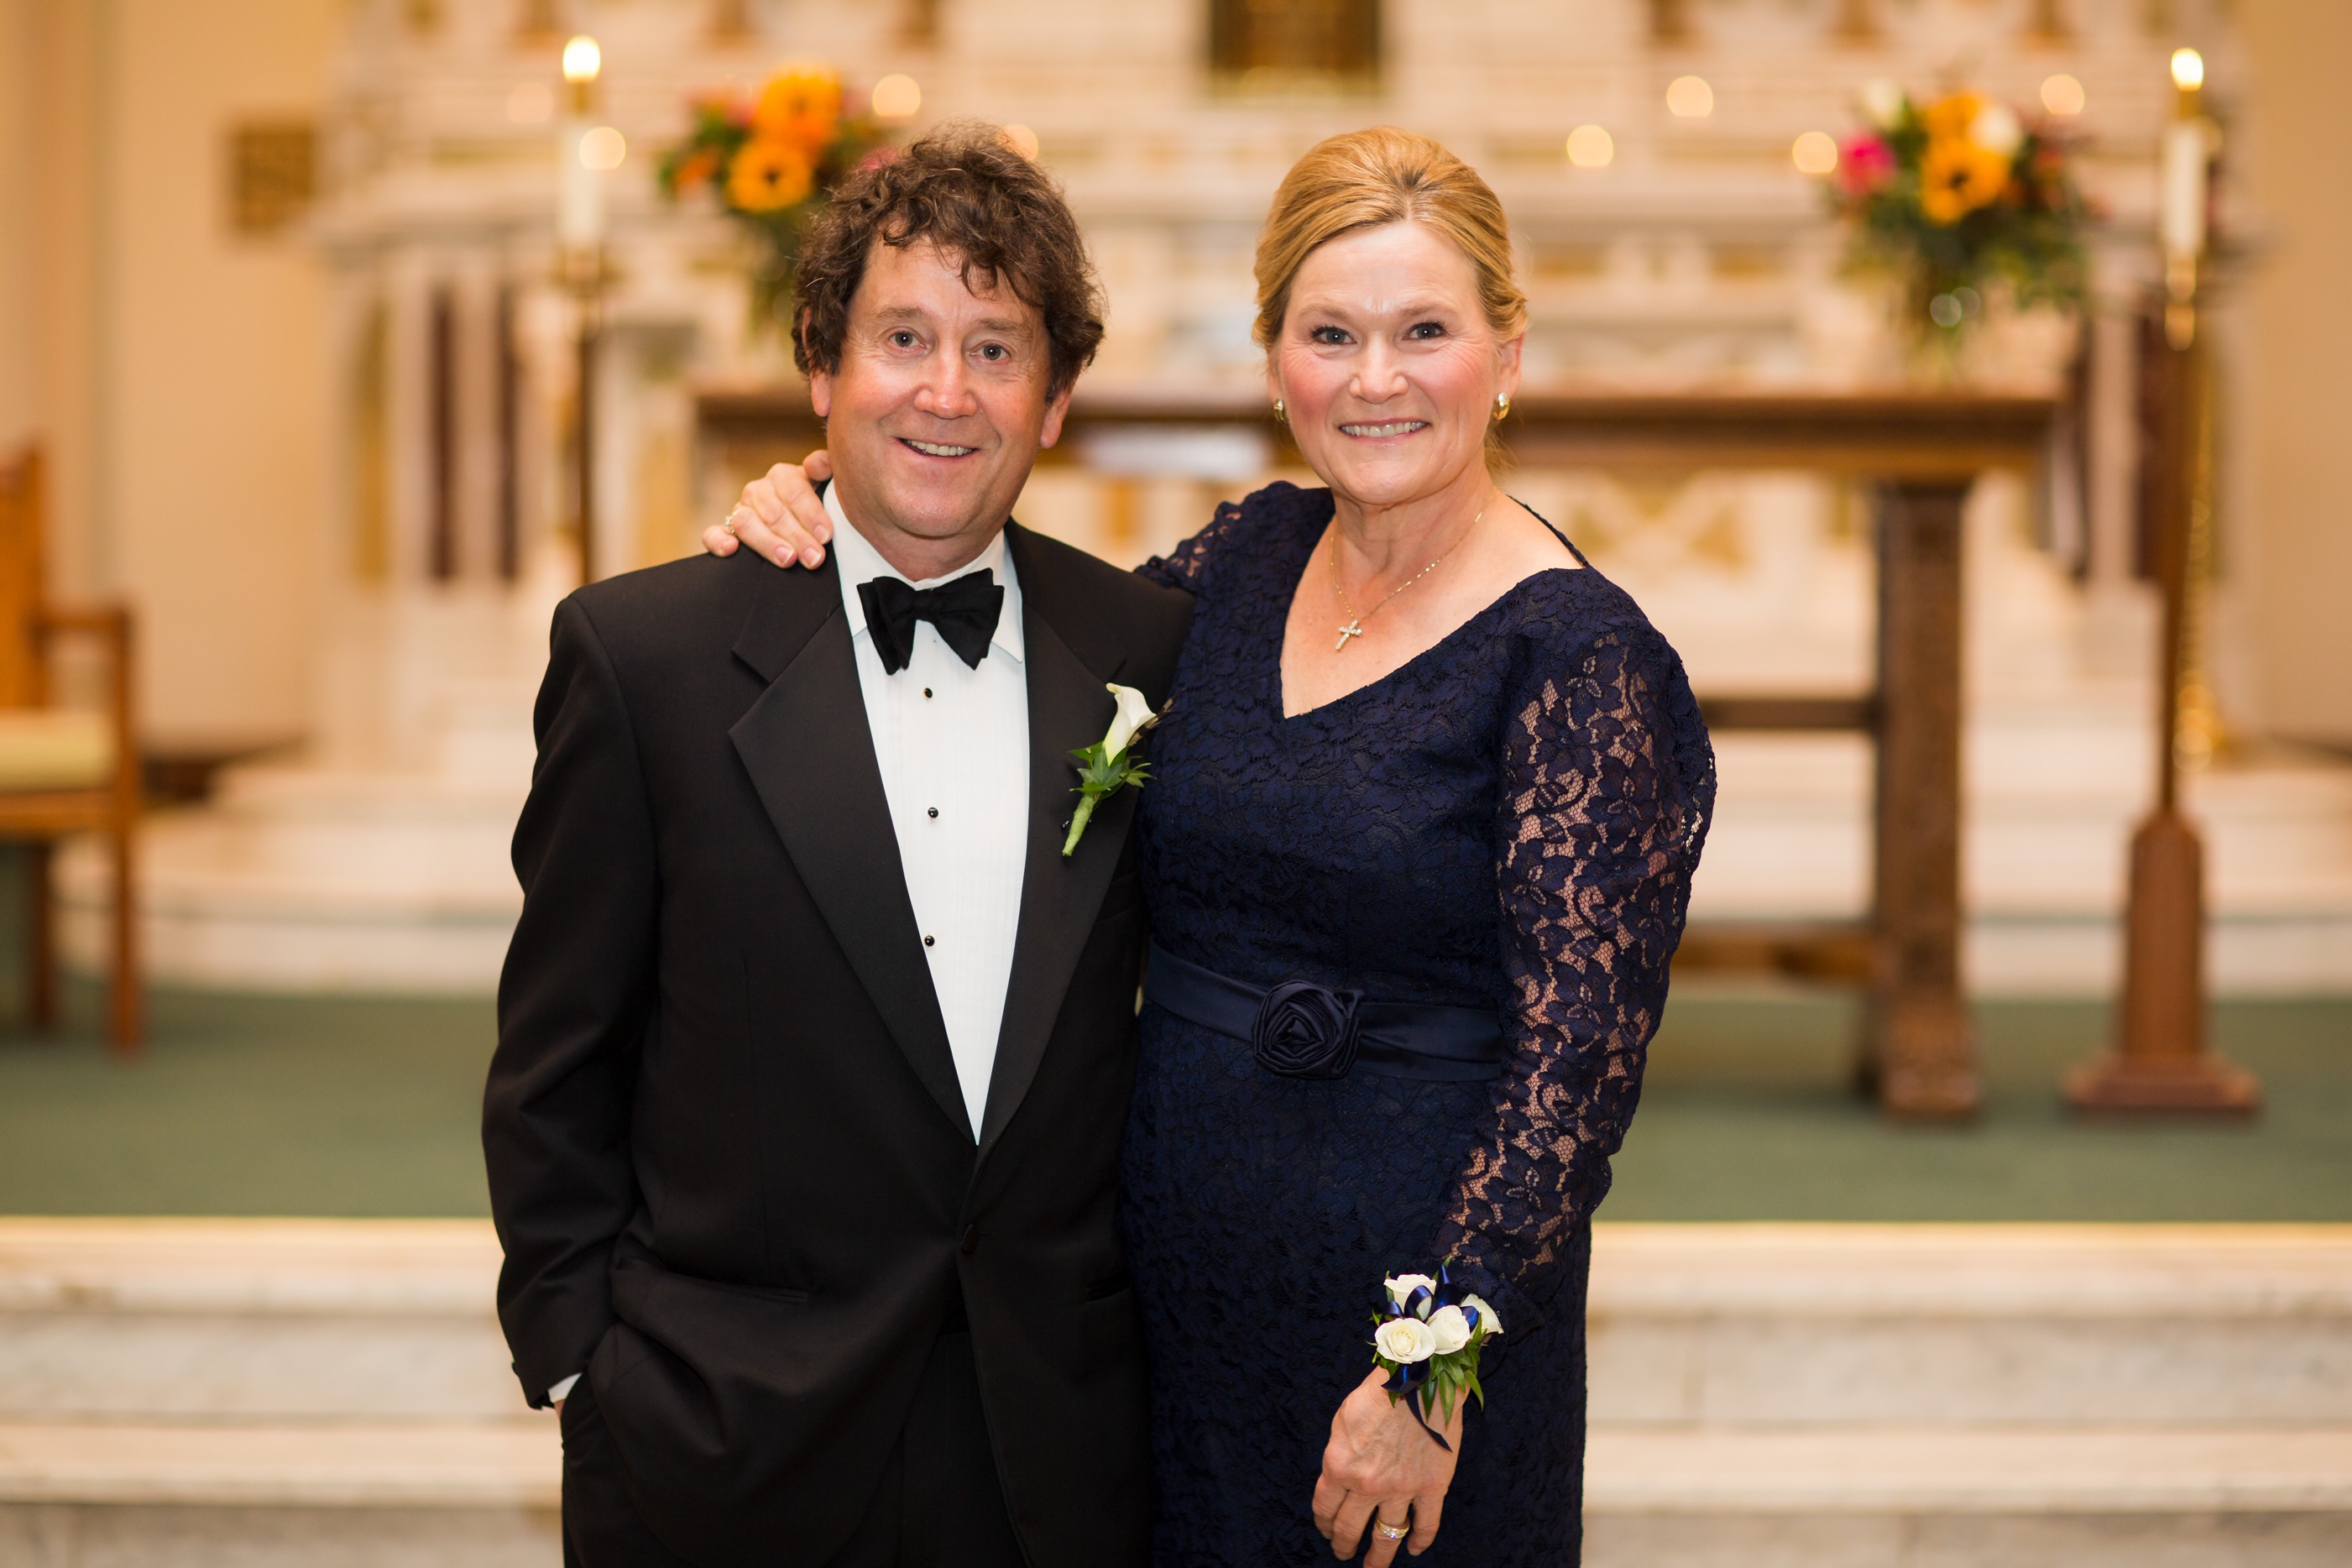 Kevin and Cindy Roberg